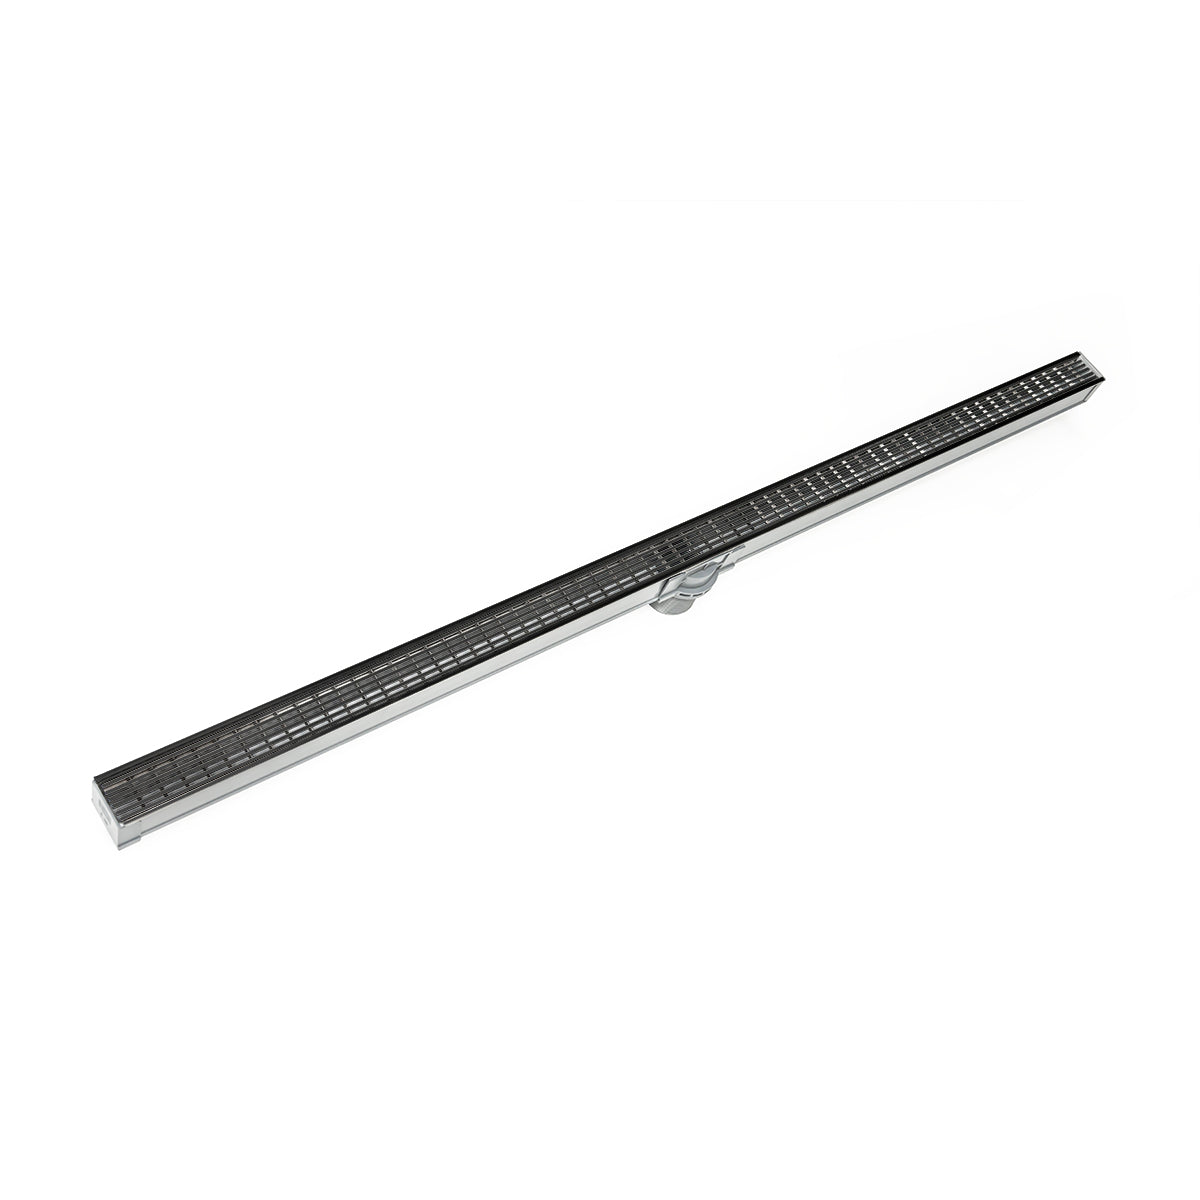 Infinity Drain 60" S-PVC Series Site Sizable Linear Drain Kit with 1 1/2" Wedge Wire Grate